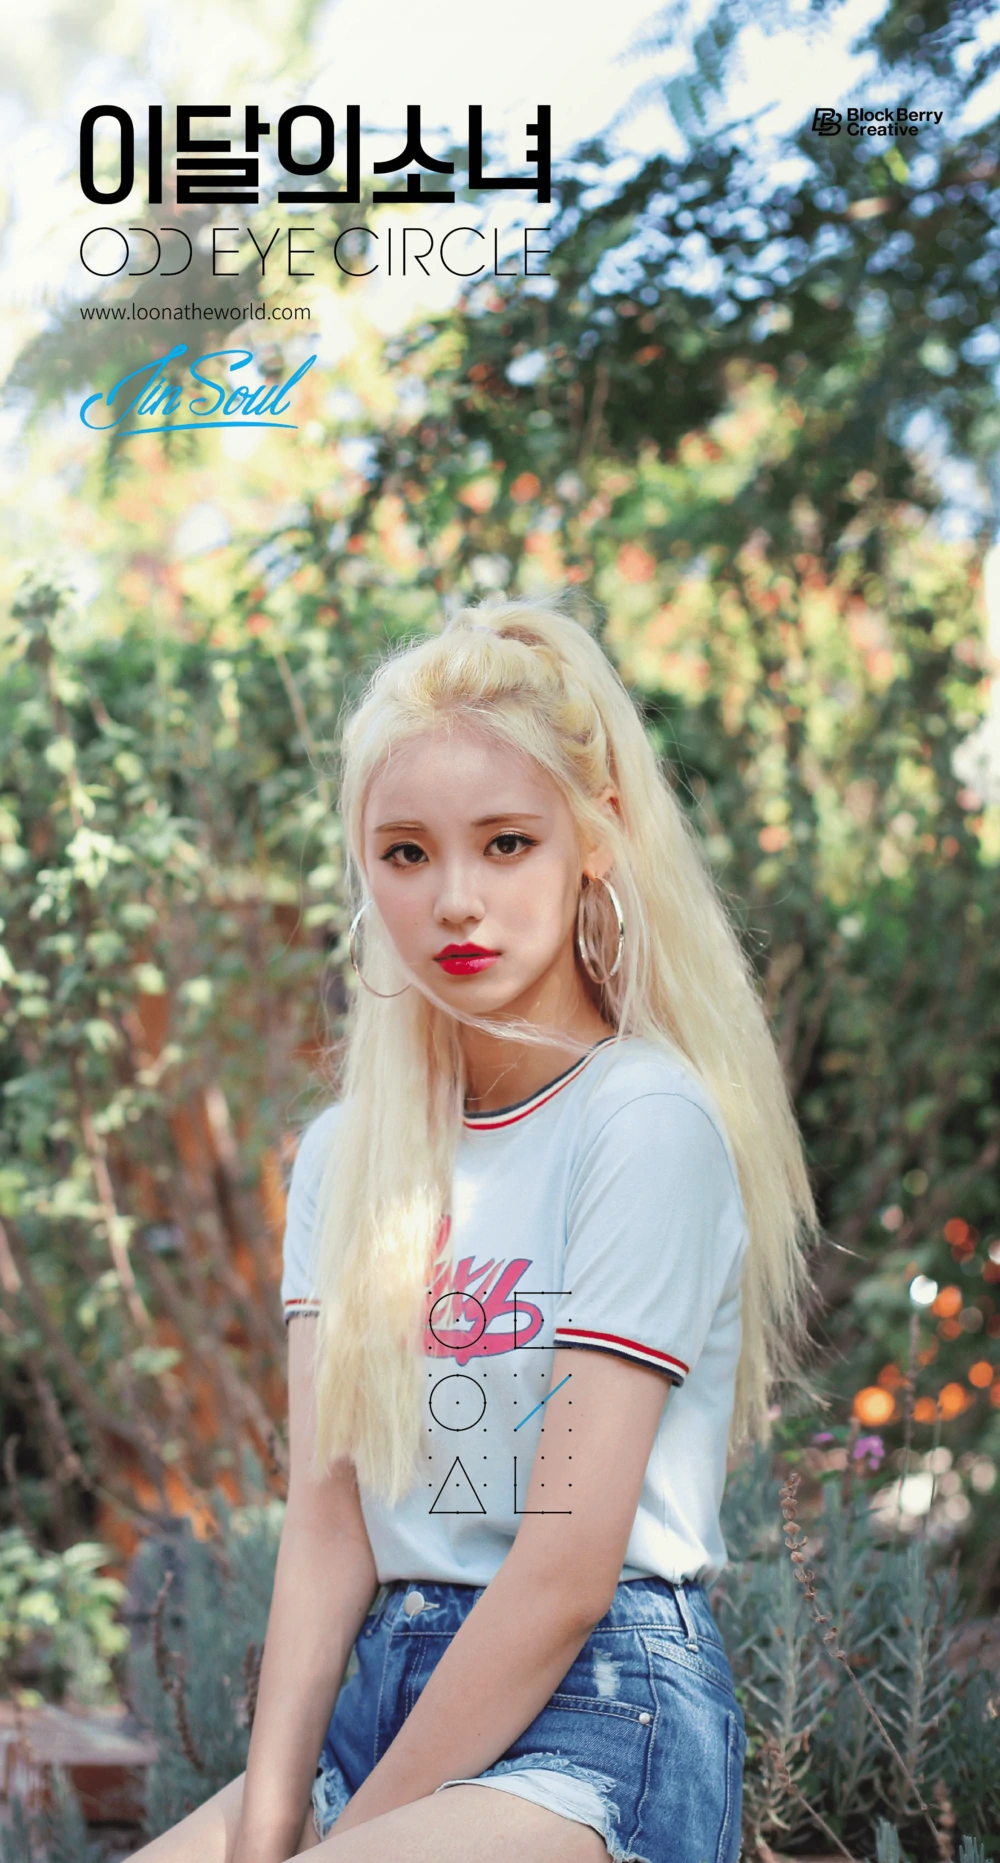 Loona OEC Odd Eye Circle Mix & Match Jinsoul Concept Teaser Picture Image Photo Kpop K-Concept 1